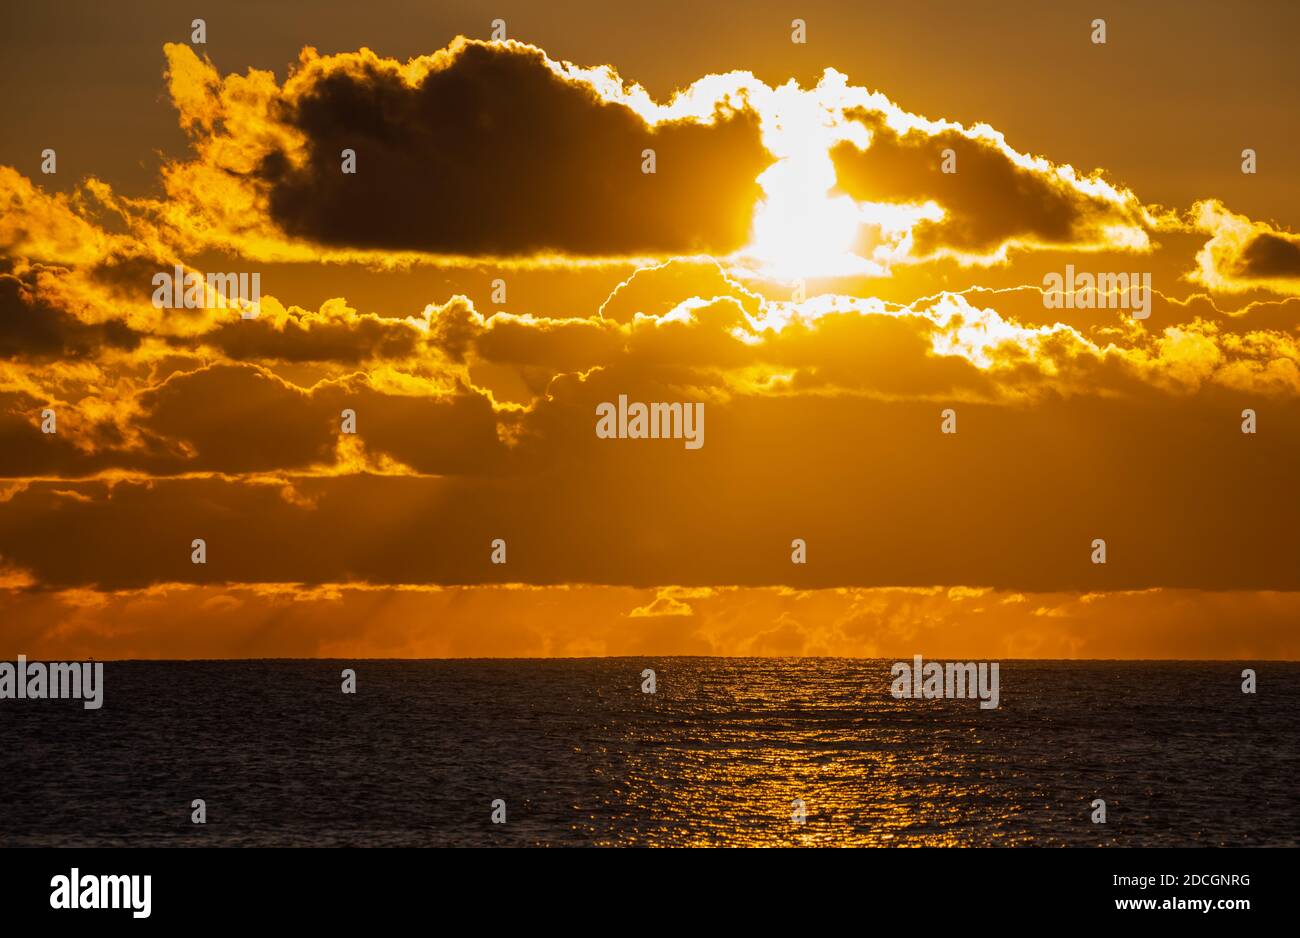 Sunset at sea. Landscape view of the low sun going down over the ocean with cloudy sky, in the UK. Stock Photo